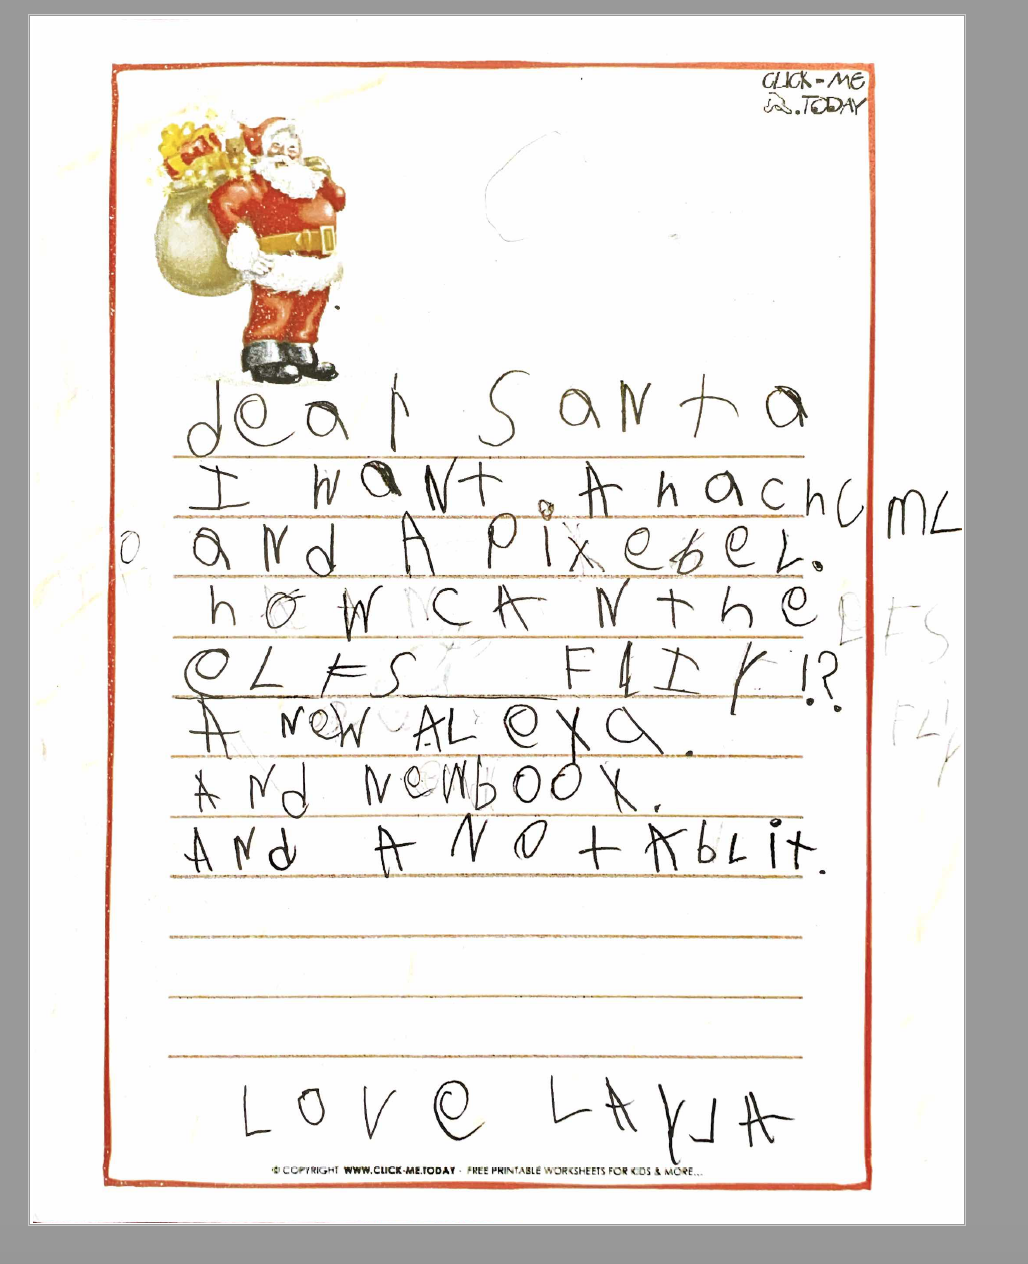 Layla's letter